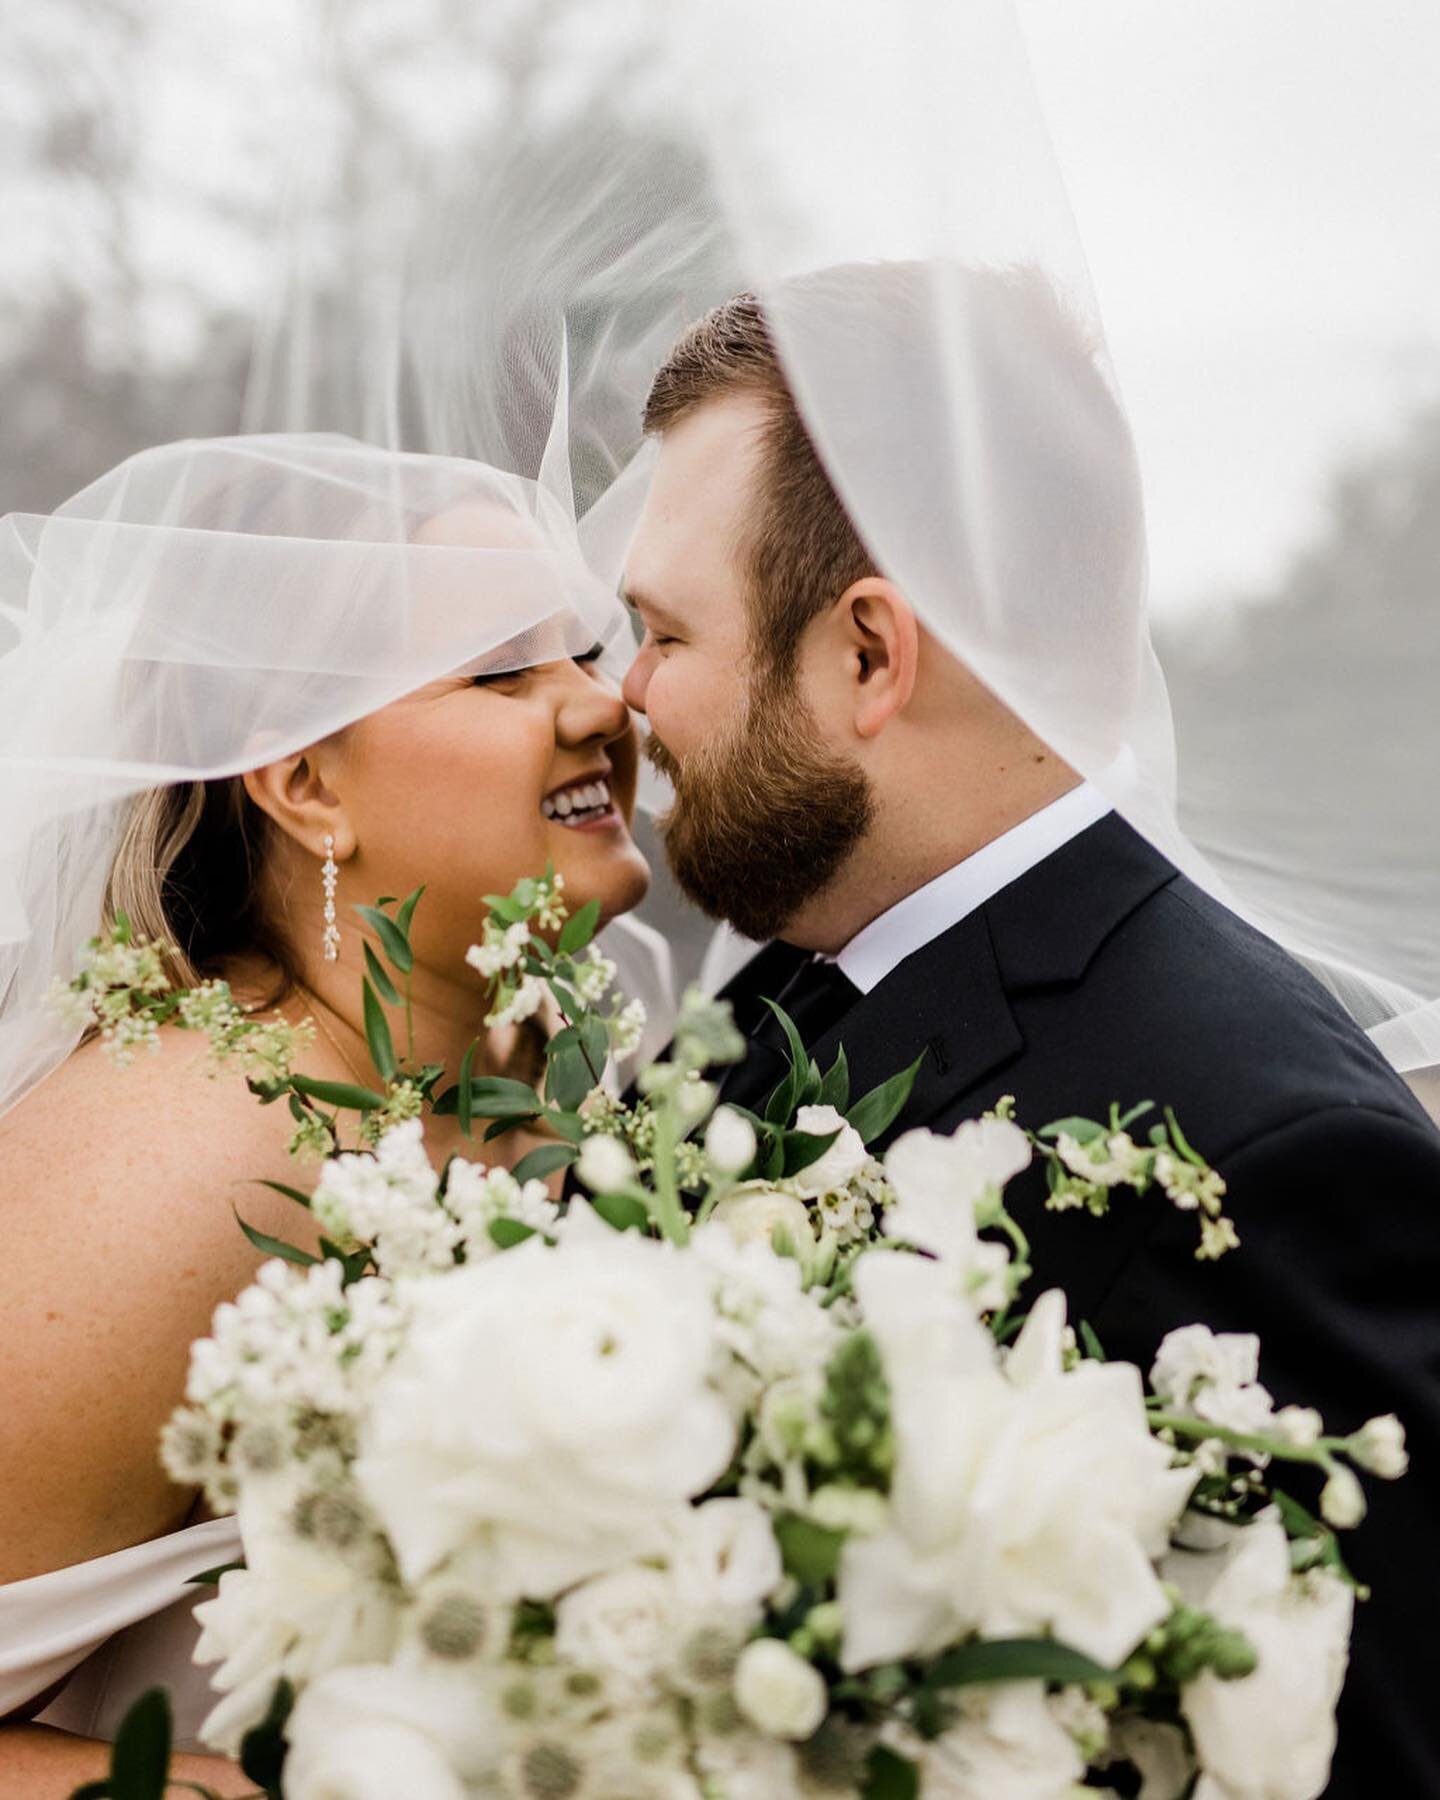 If you know one thing about me it&rsquo;s that I LOVE a good veil shot&hellip;and a Winter wedding at PCR!! This gorgeous February wedding was perfect from beginning to end 🤍✨

If you are on the hunt for the perfect Winter wedding venue, we still ha